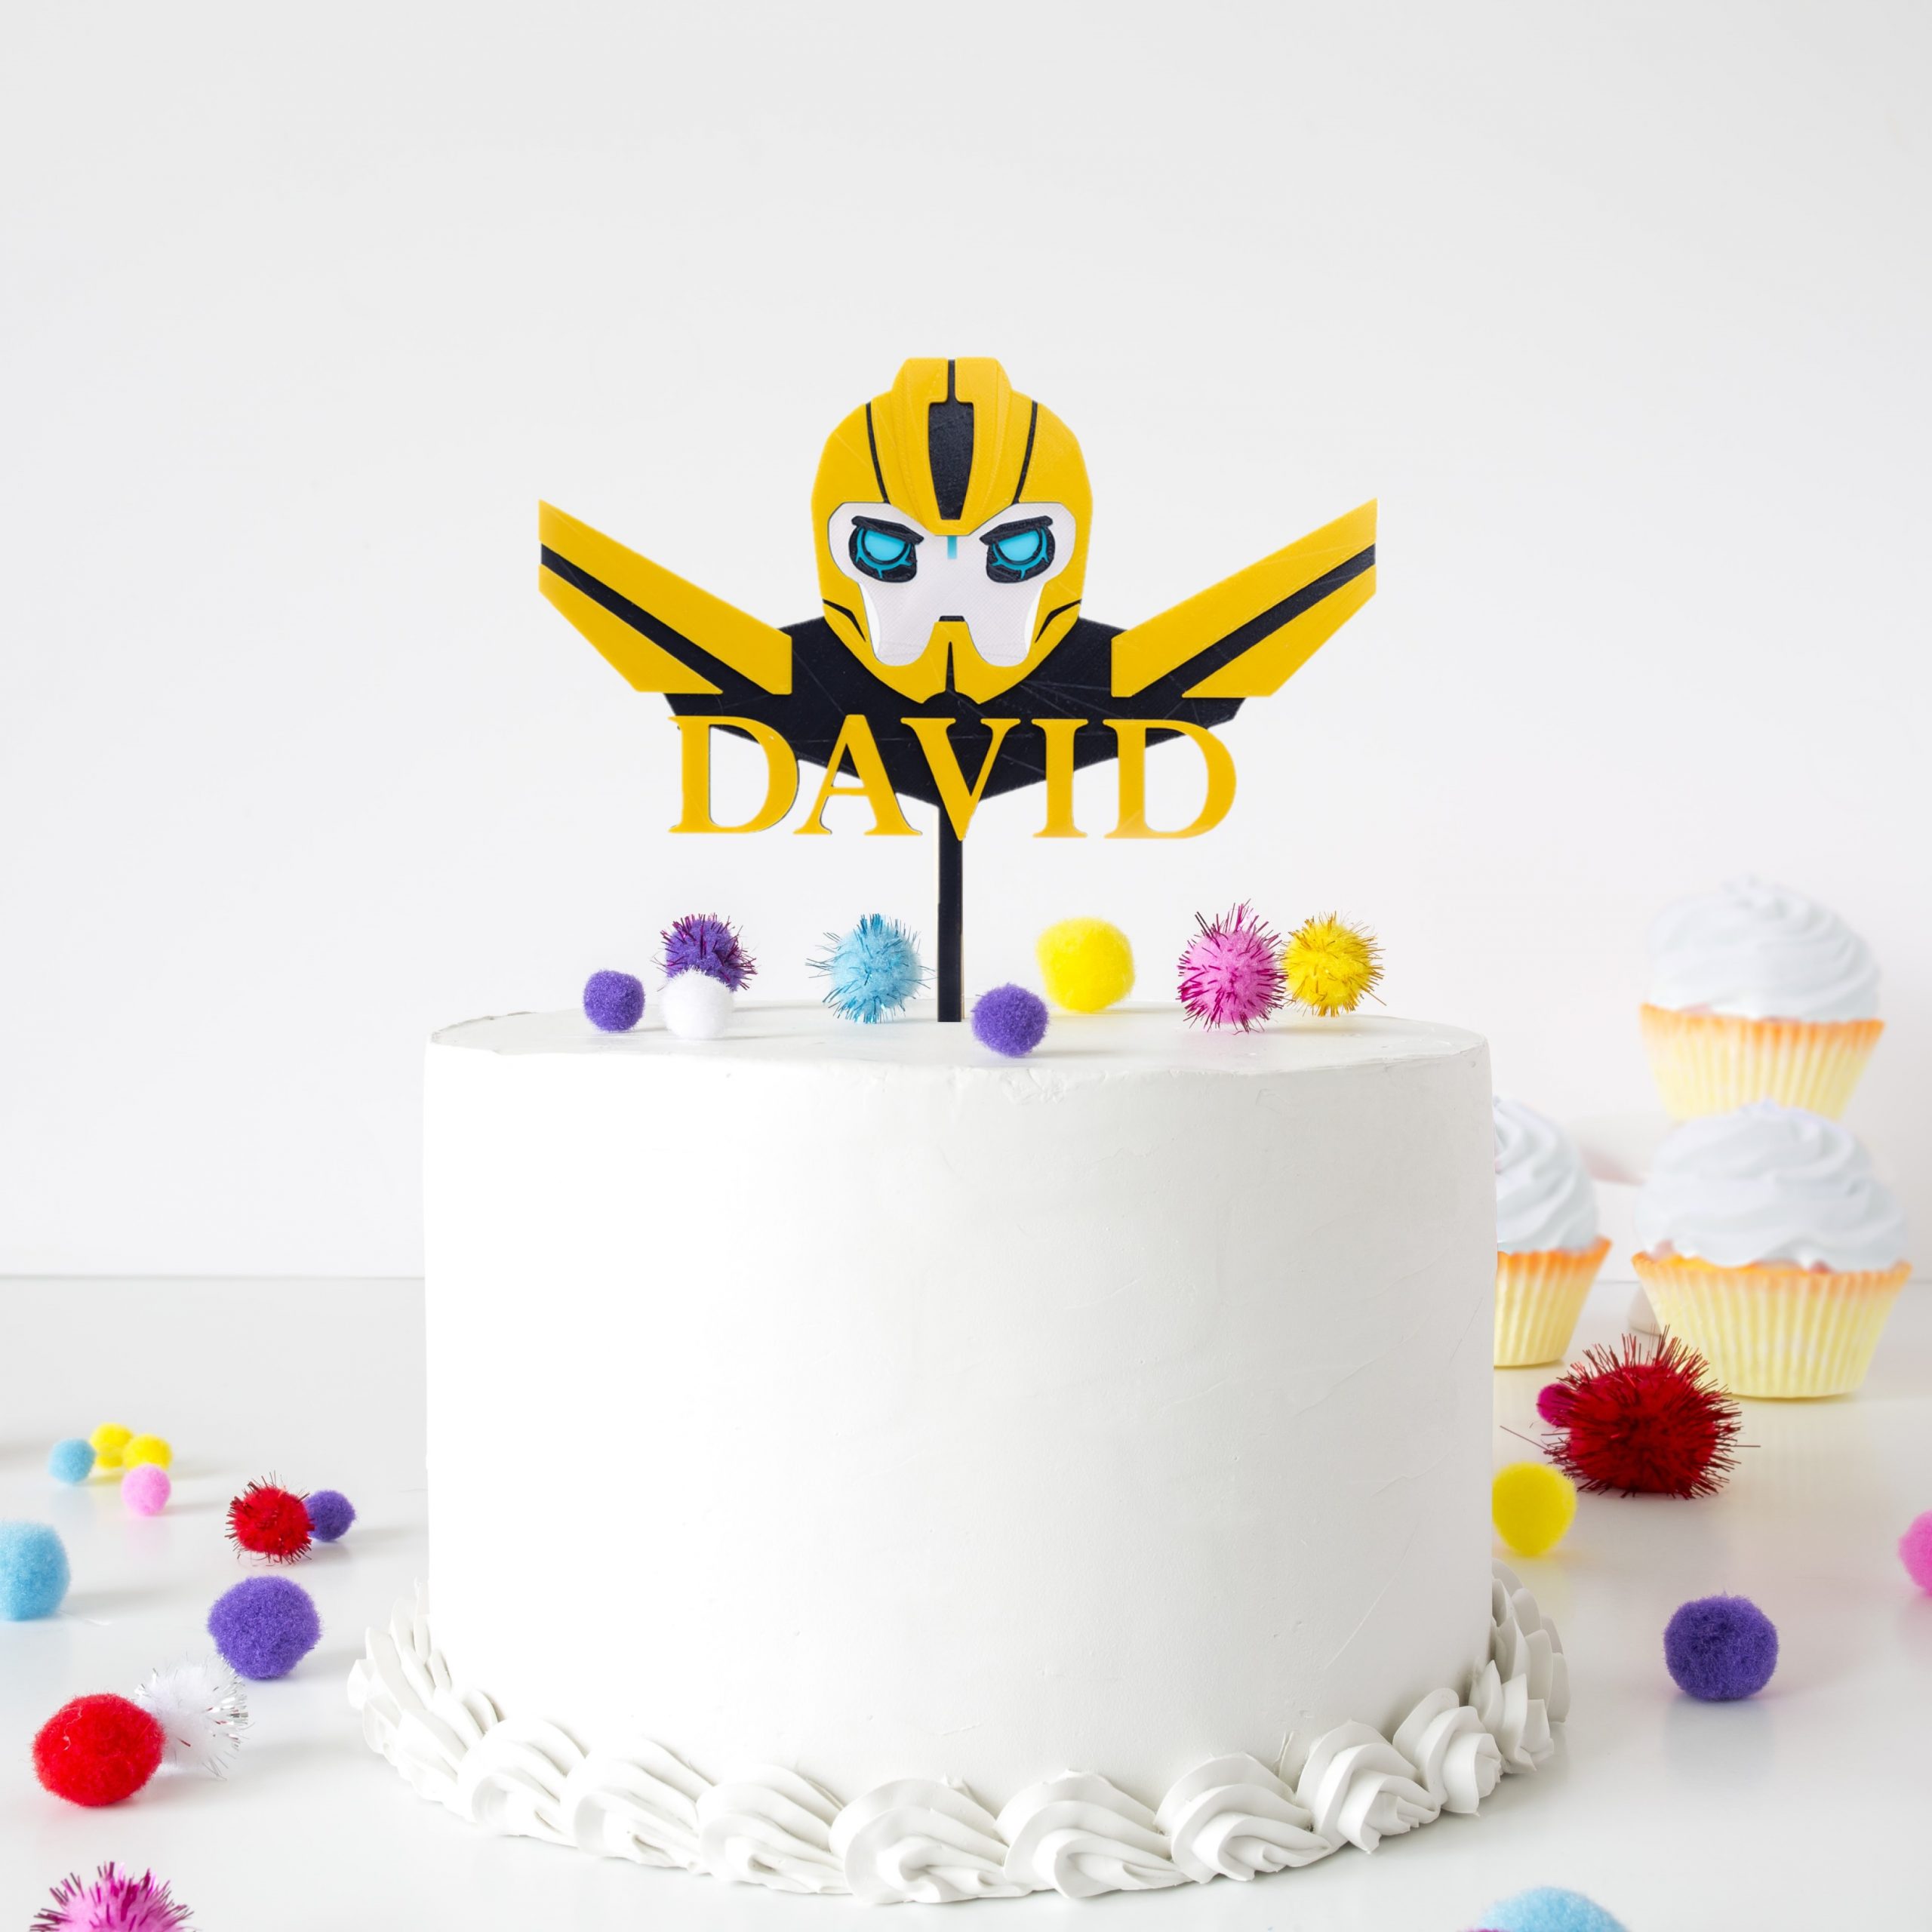 Amazon.com: LaVenty Happy Bee Day Cake Topper Bumble Bee Cake Topper Bumble  Bee Themed Party Happy Supplies Bumble Bee Decoration : Grocery & Gourmet  Food